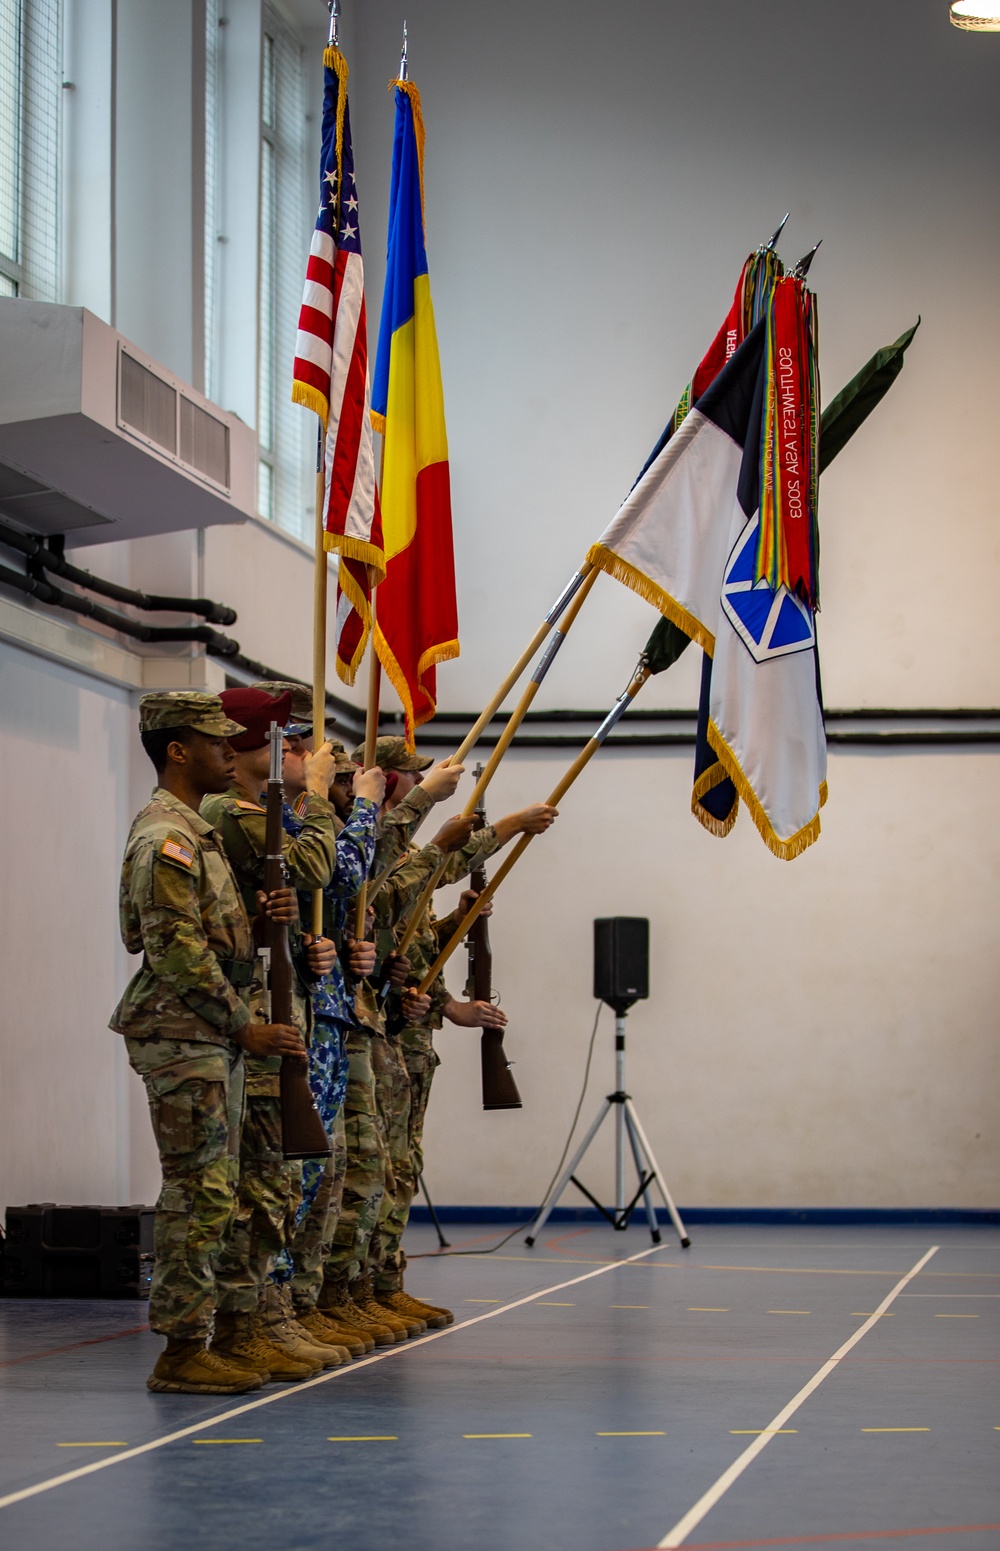 10th Mountain Division transfers authority to the 82nd Airborne Division at Mihail Kogalniceanu Air Base